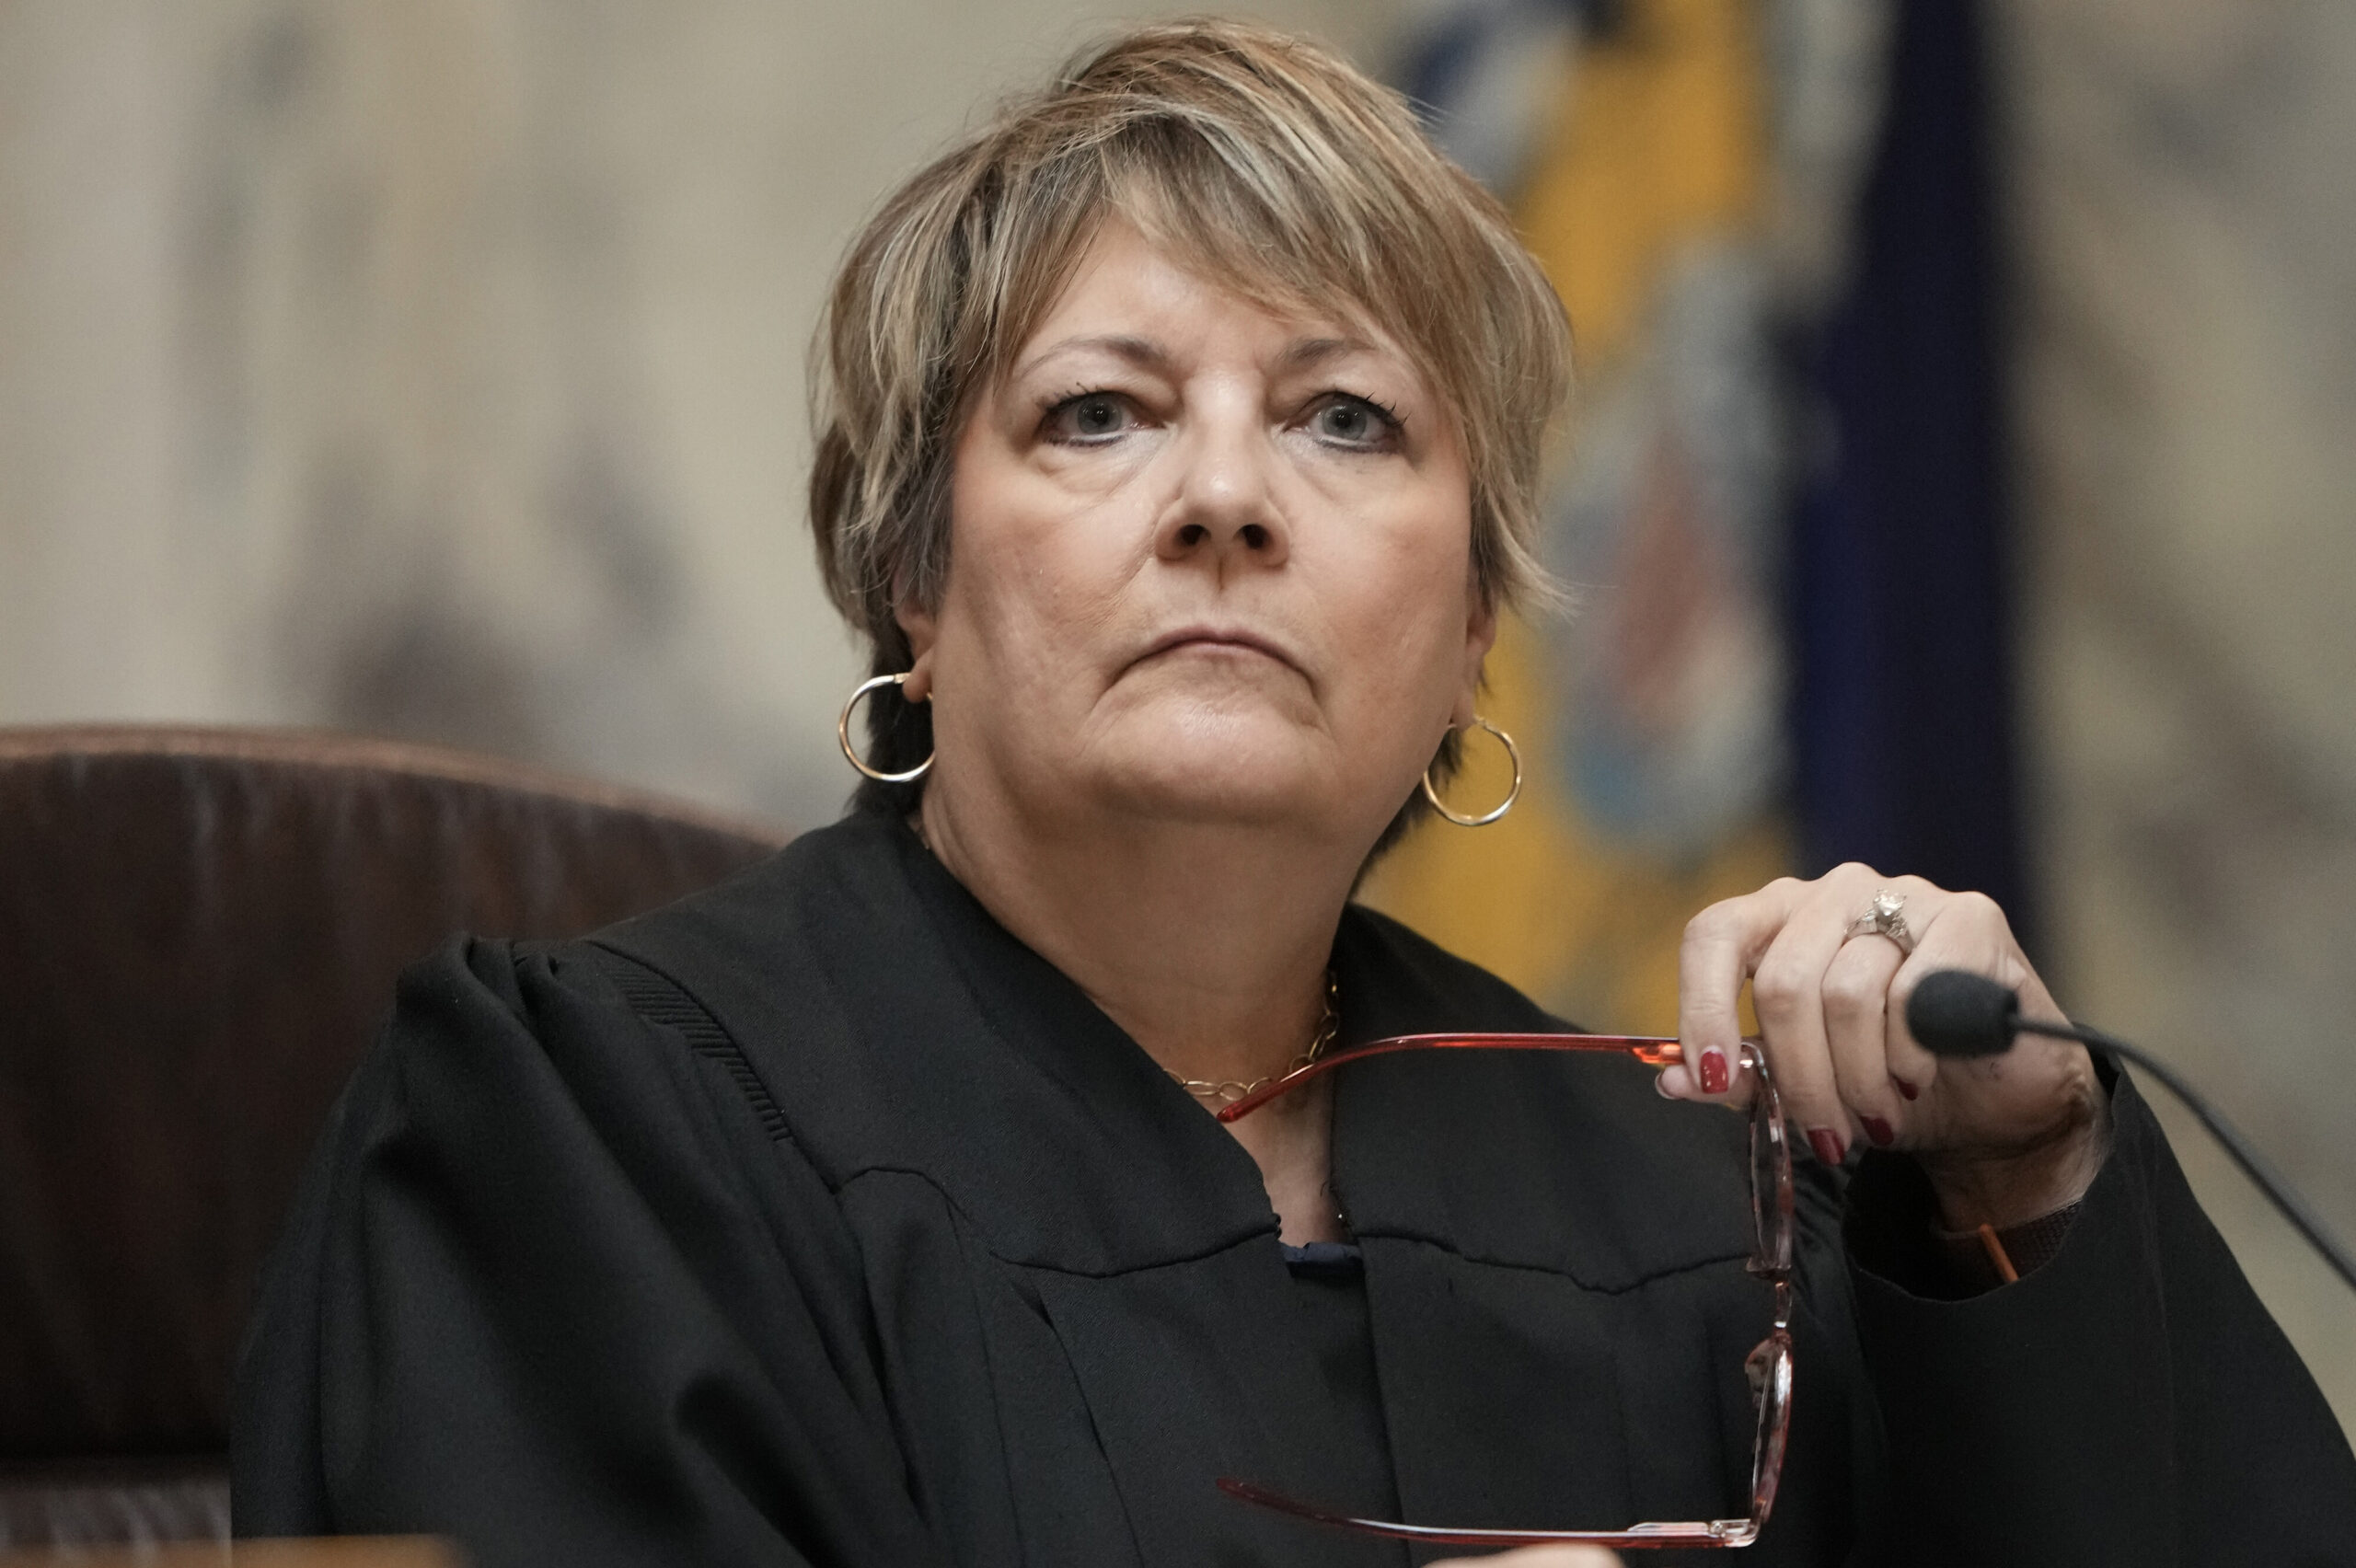 Lawsuit filed to block potential impeachment of Wisconsin Supreme Court Justice Janet Protasiewicz